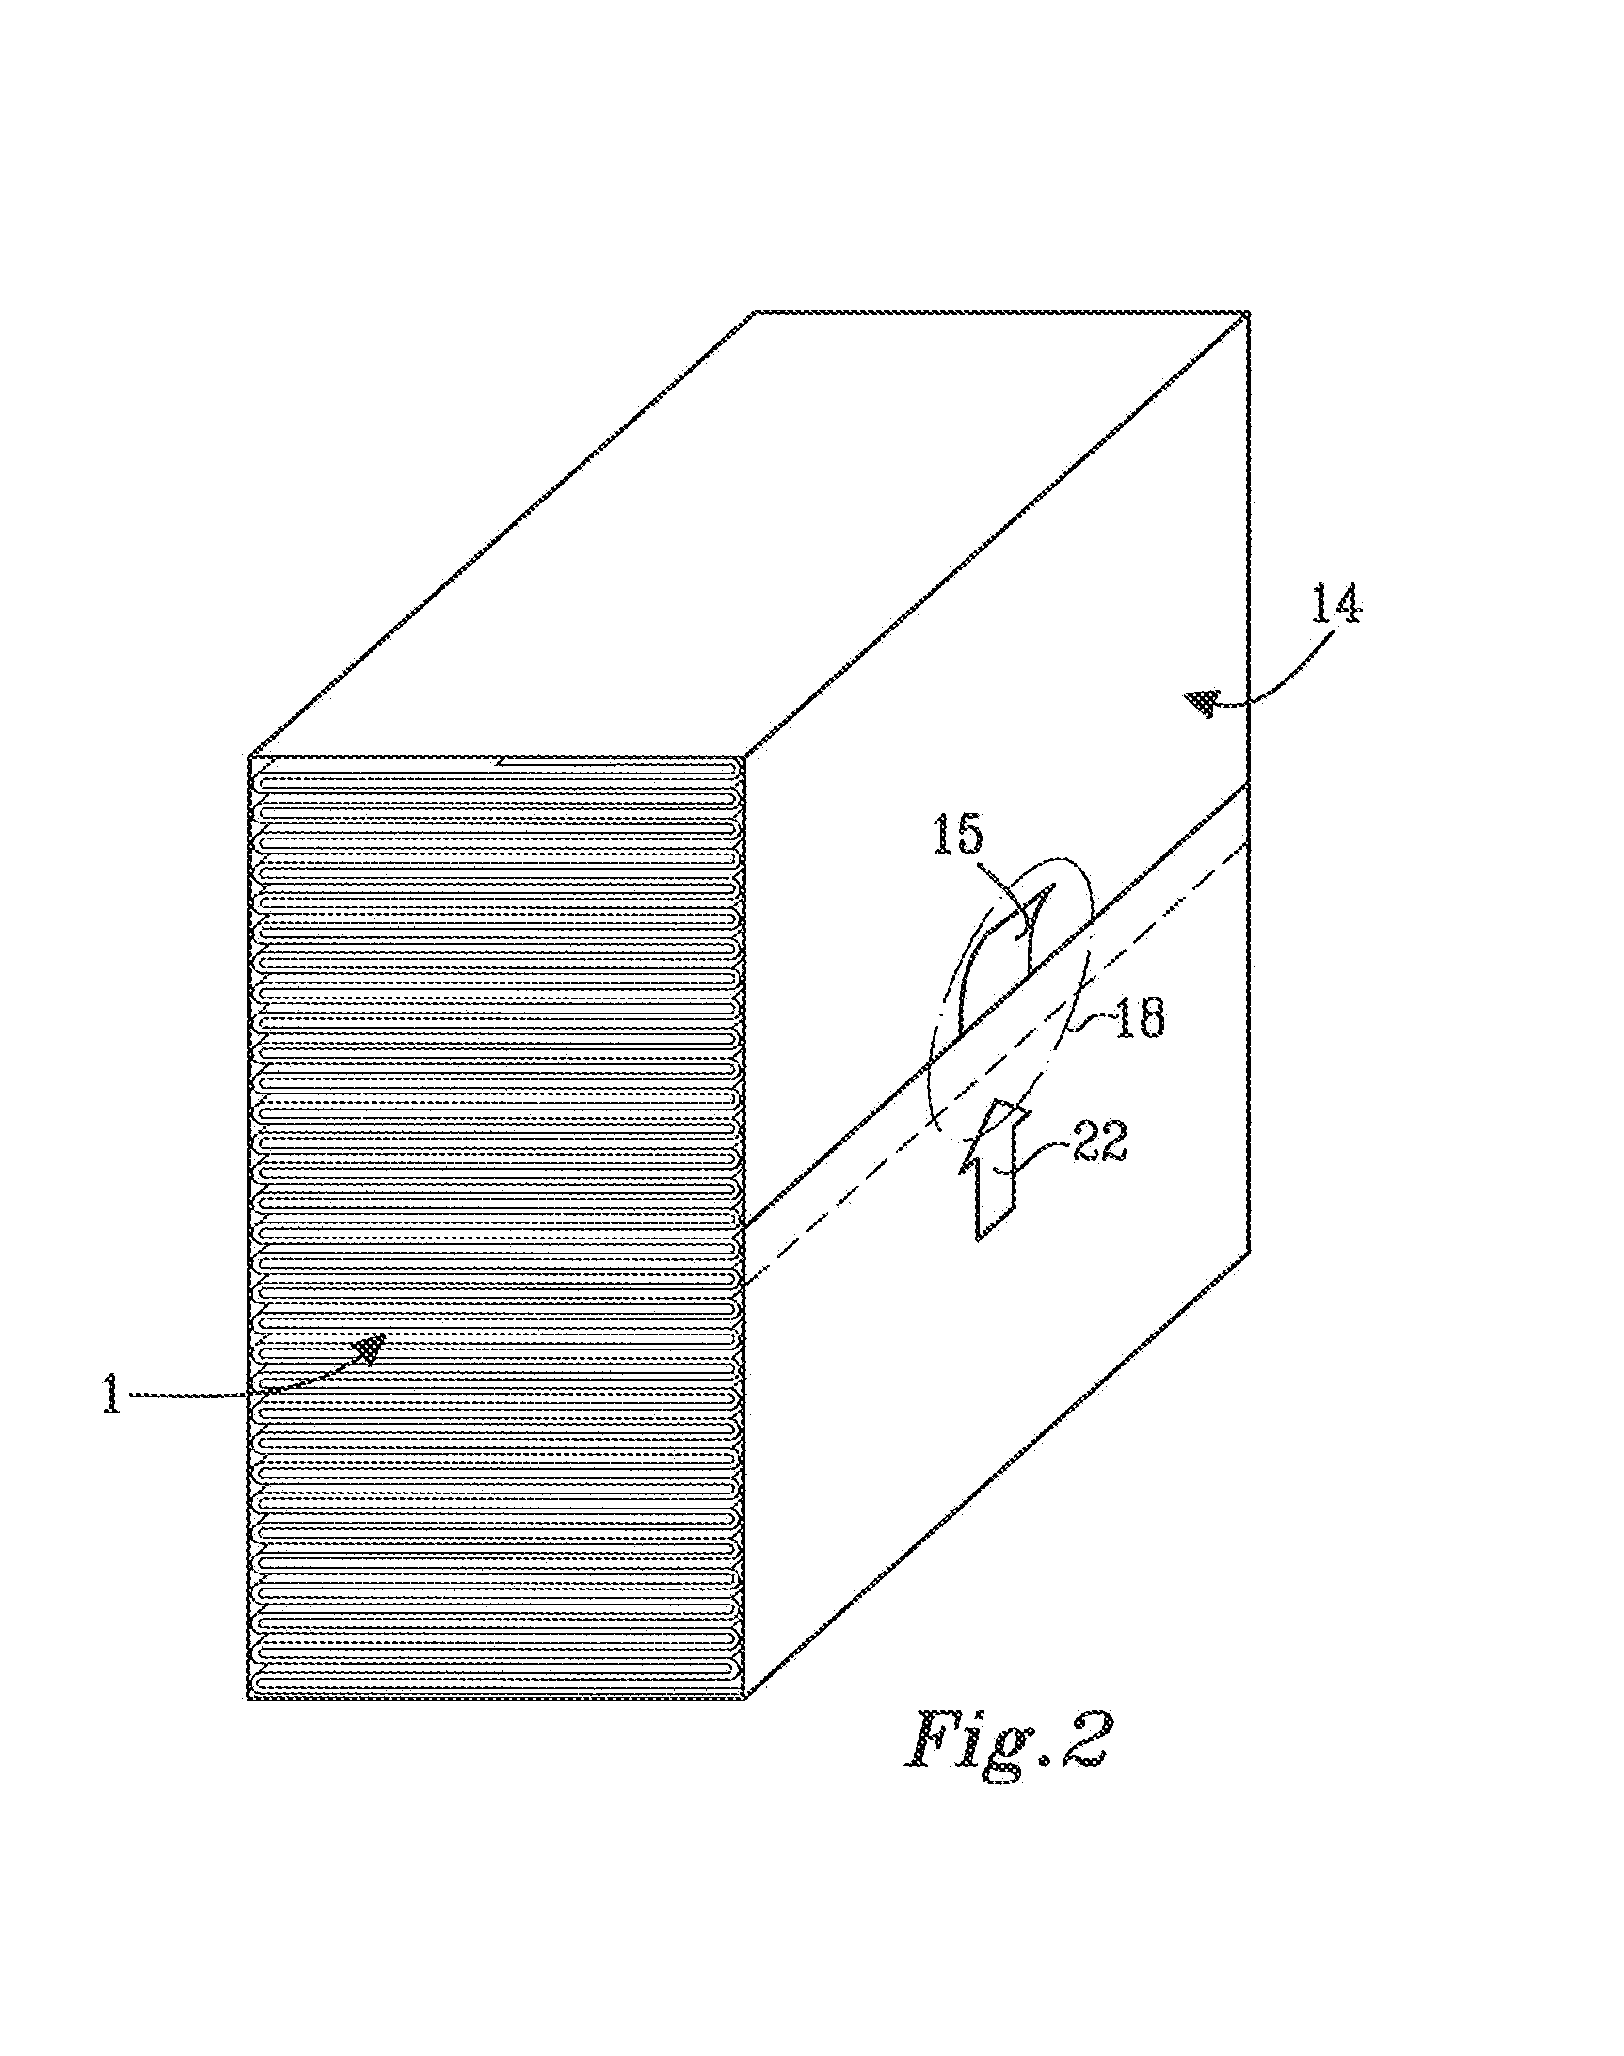 Package comprising a stack of z-folded web material